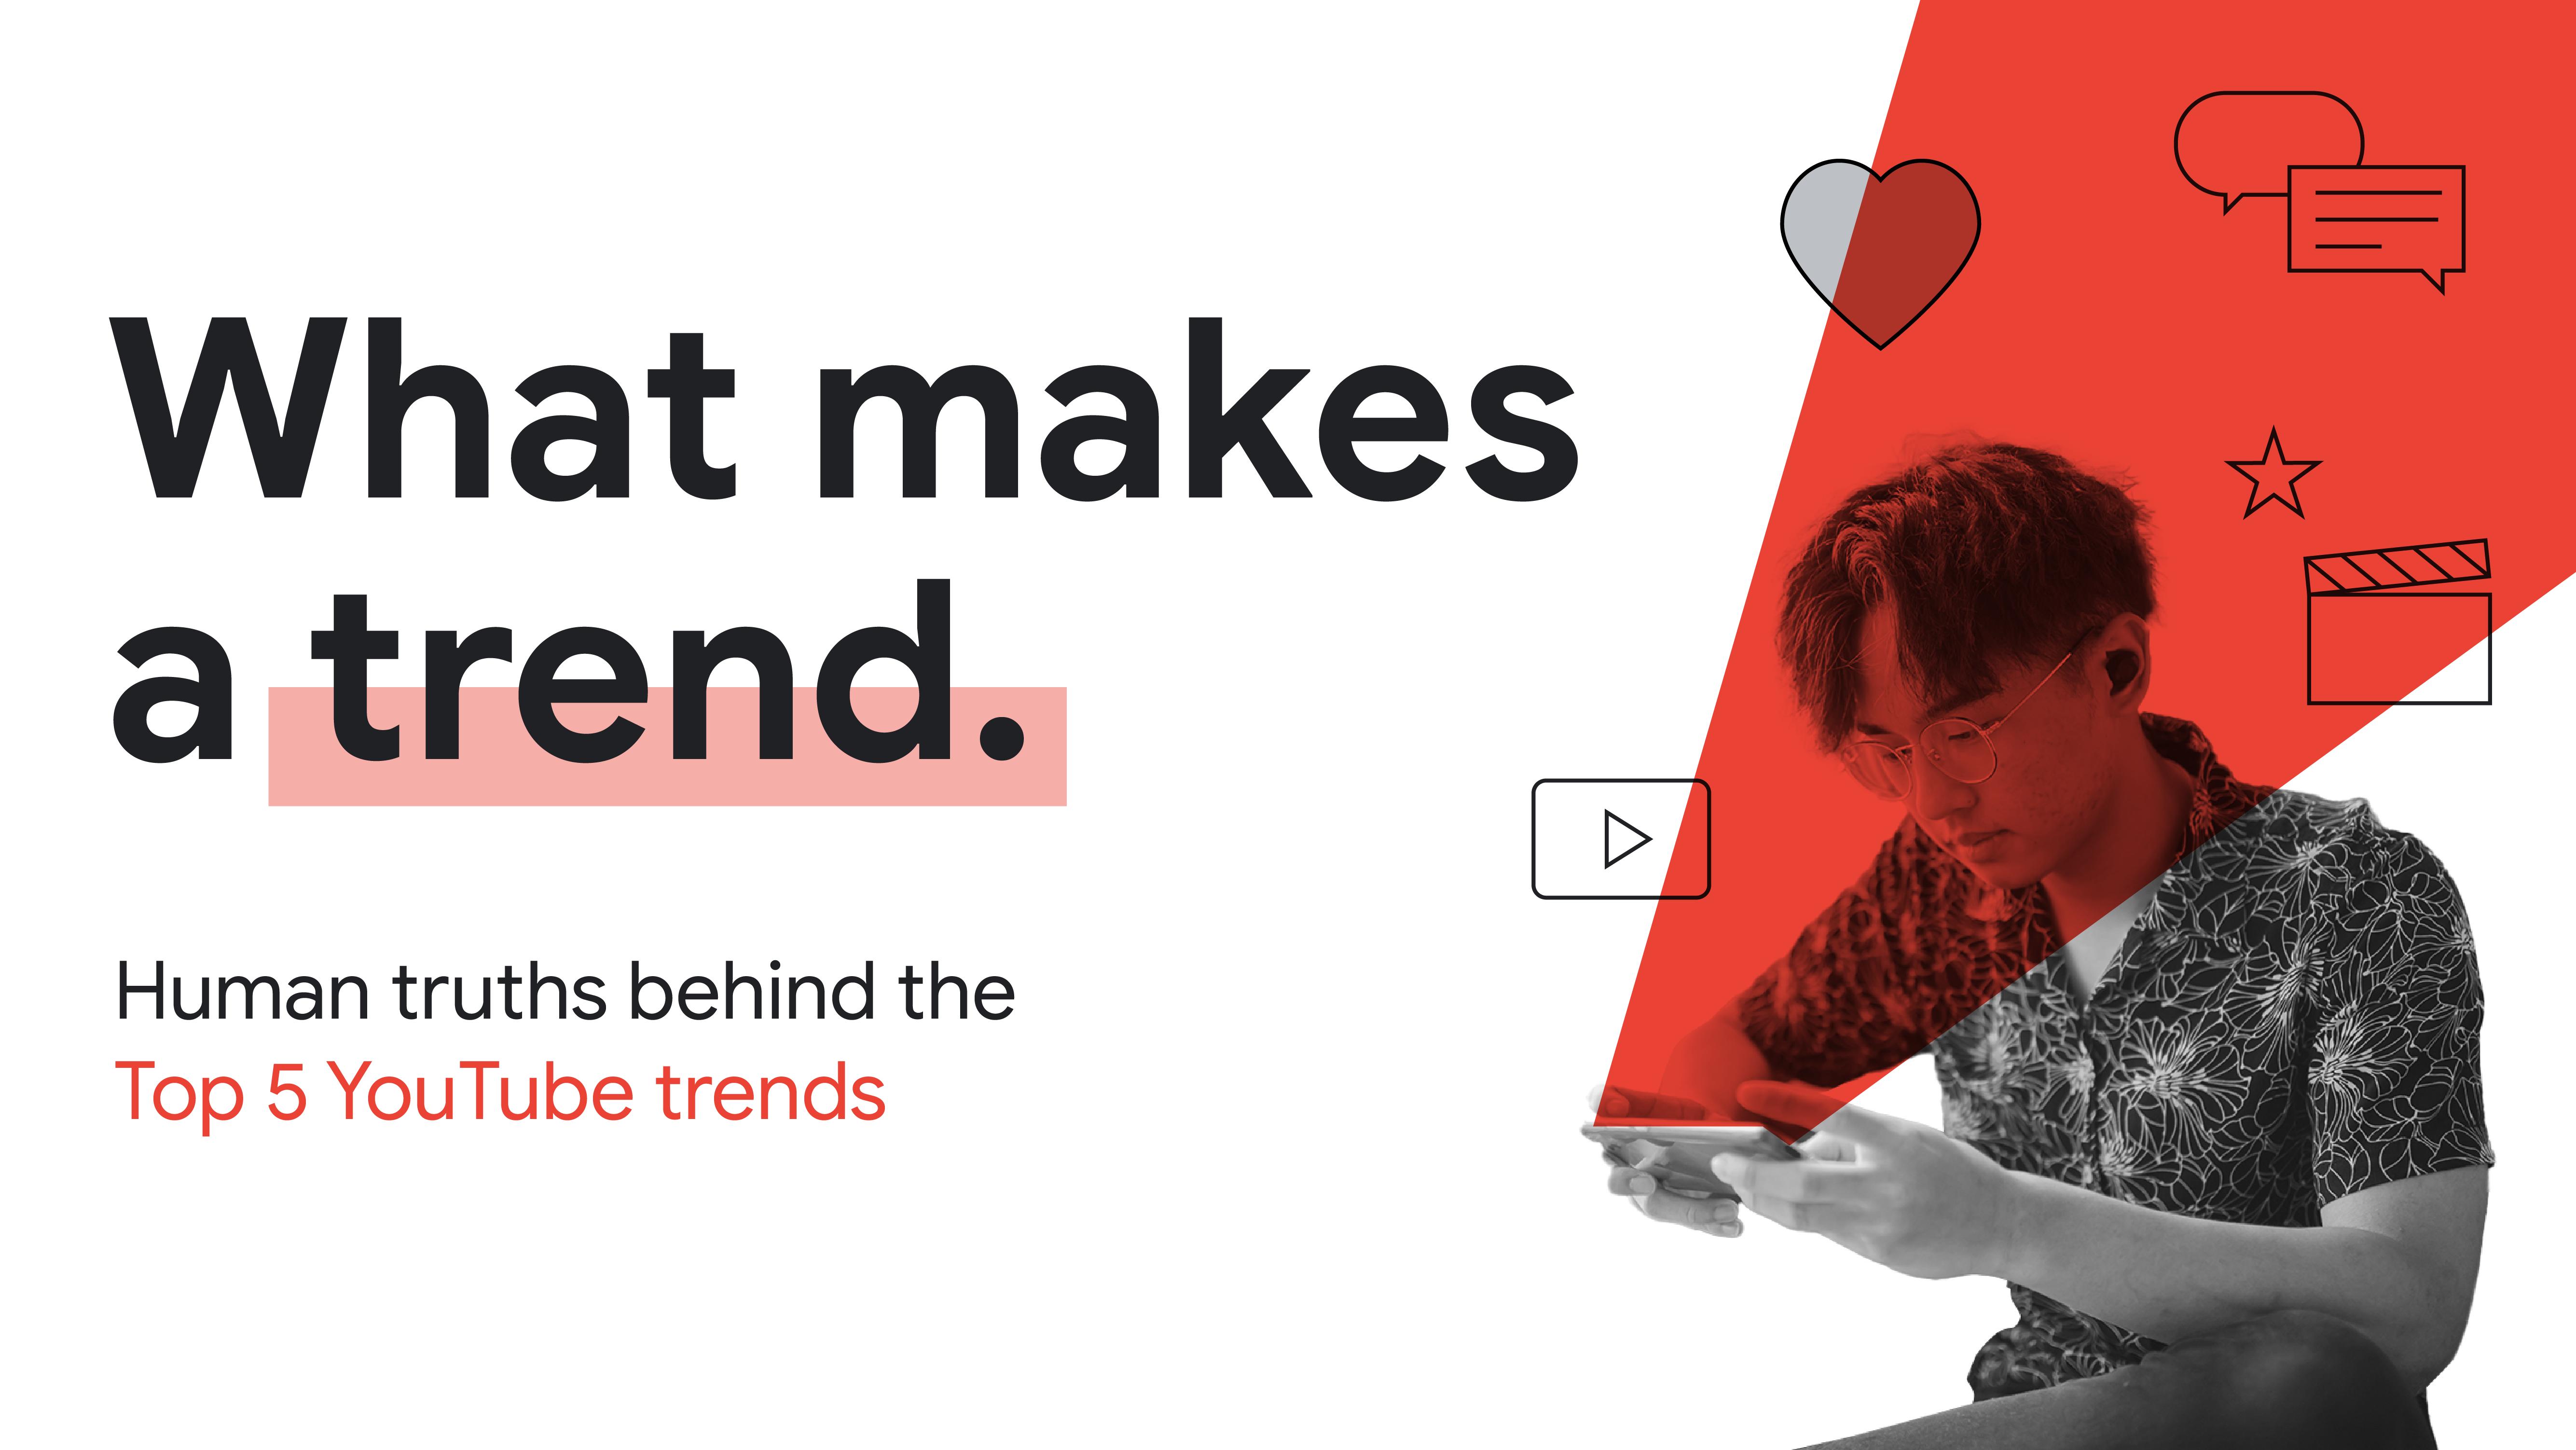 What makes a trend. Human truths behind the Top 5 YouTube trends.